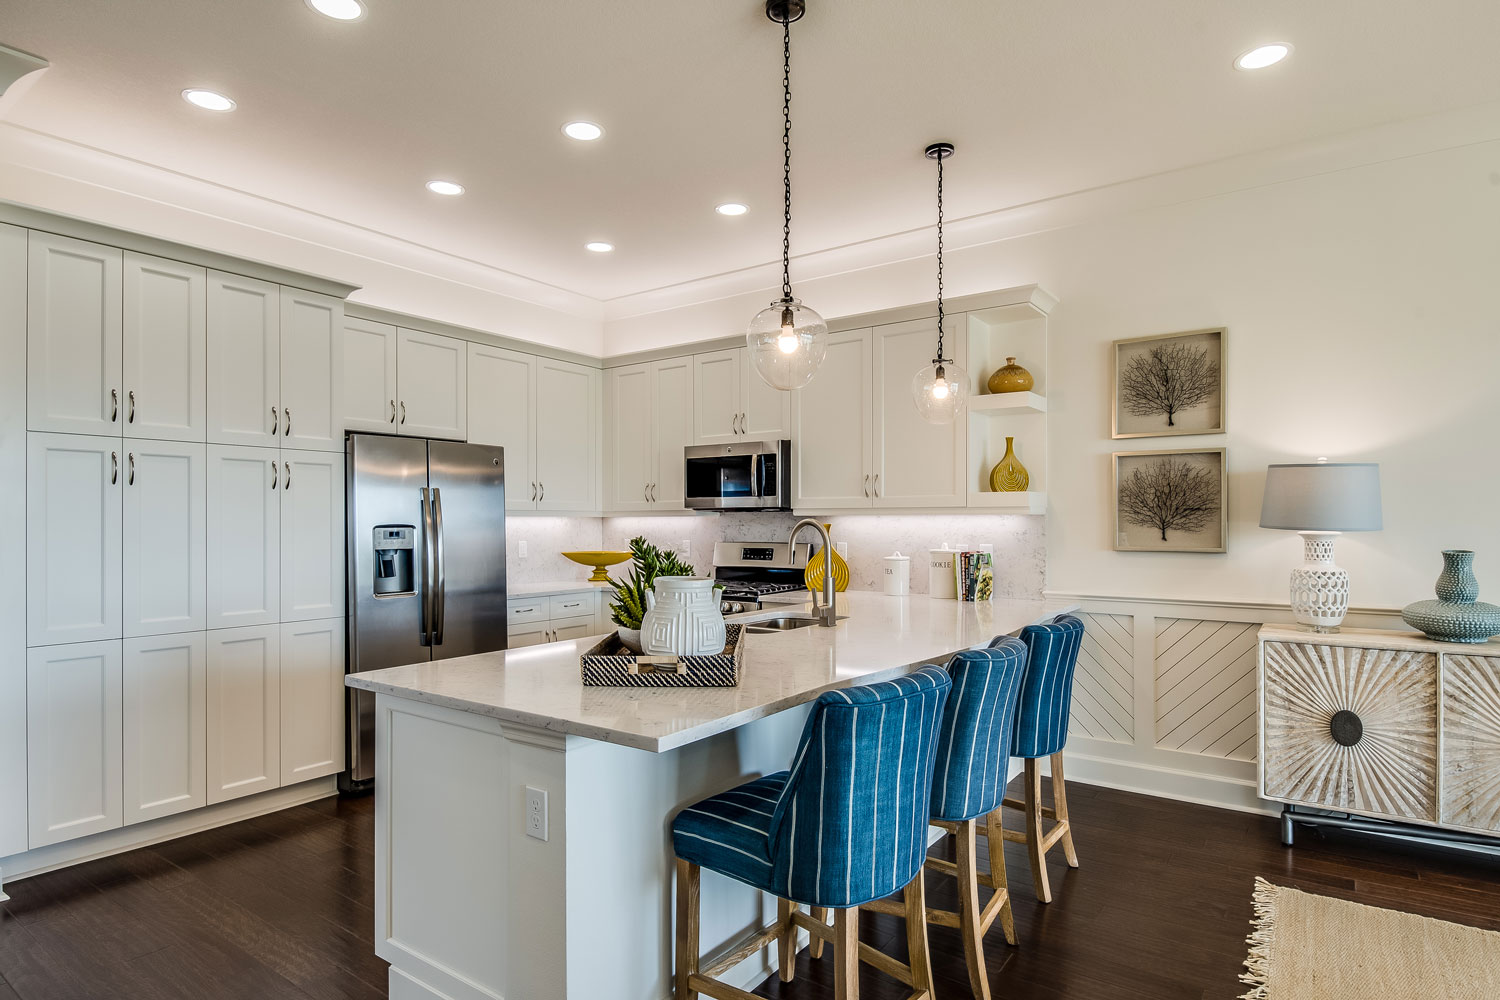 White overall kitchen design with white cabinets, white marble countertop and breakfast bar and dangling lamps